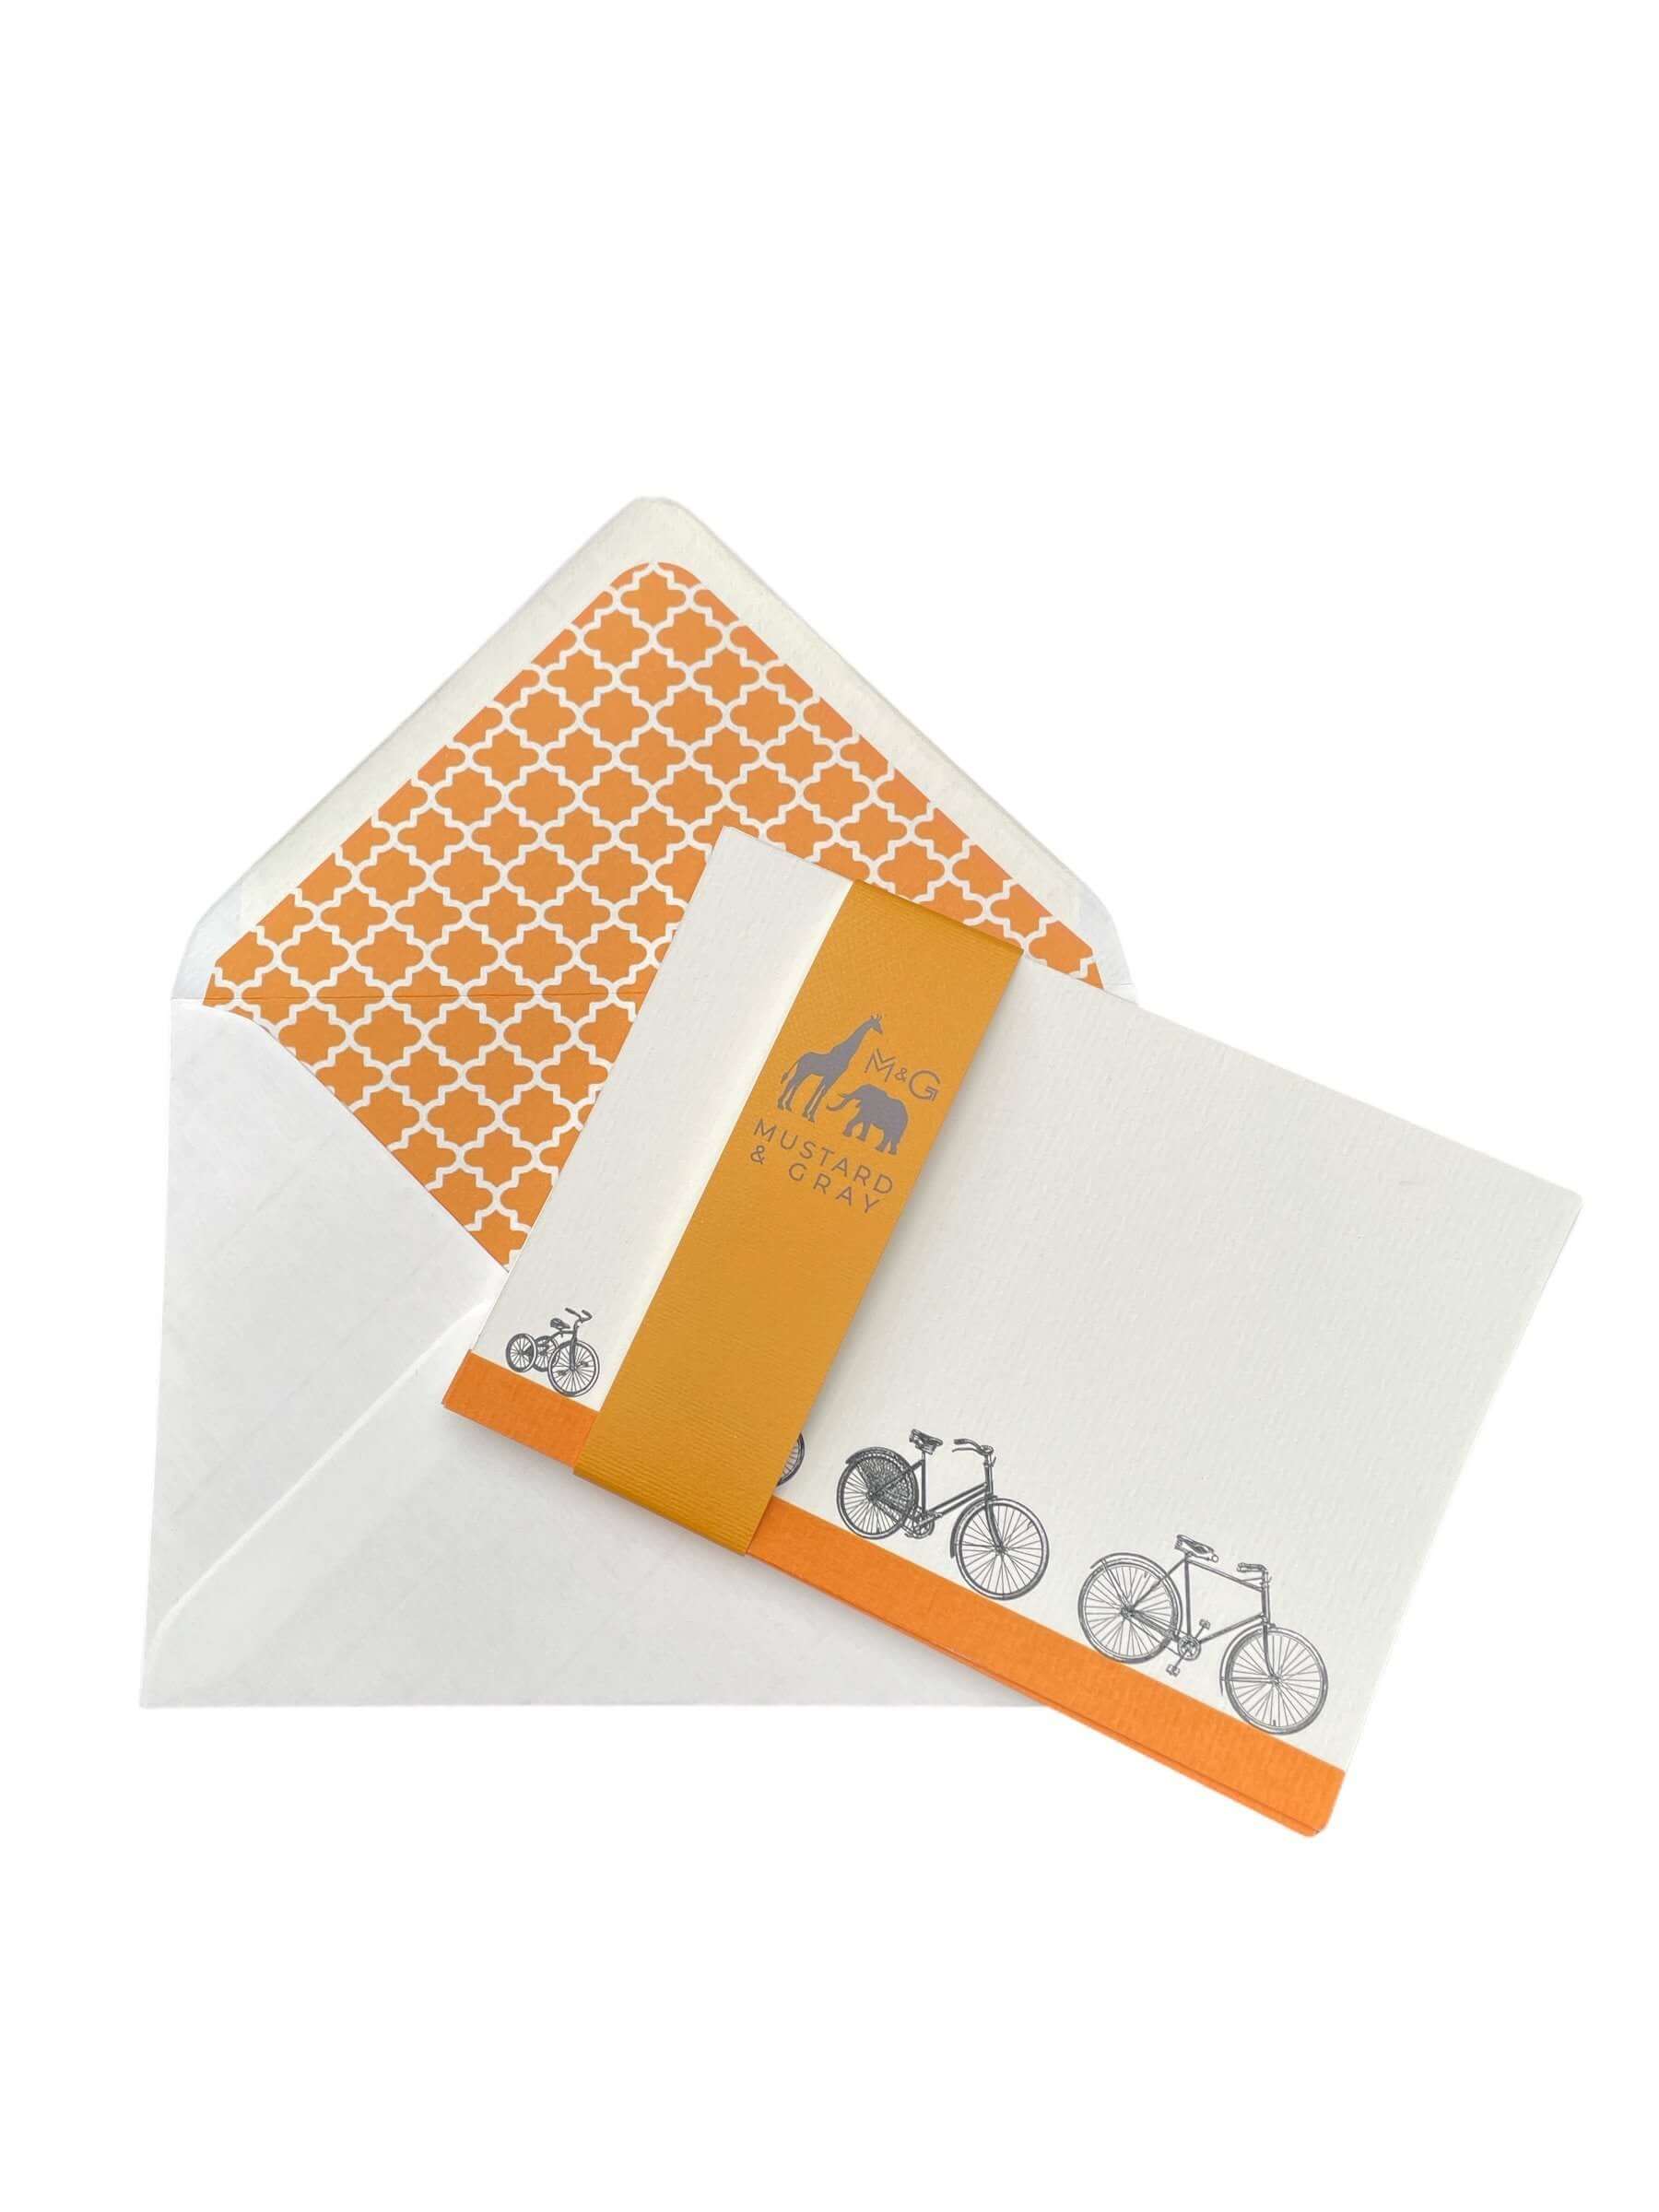 Bicycle Trail Family Notecard Set with Lined Envelopes